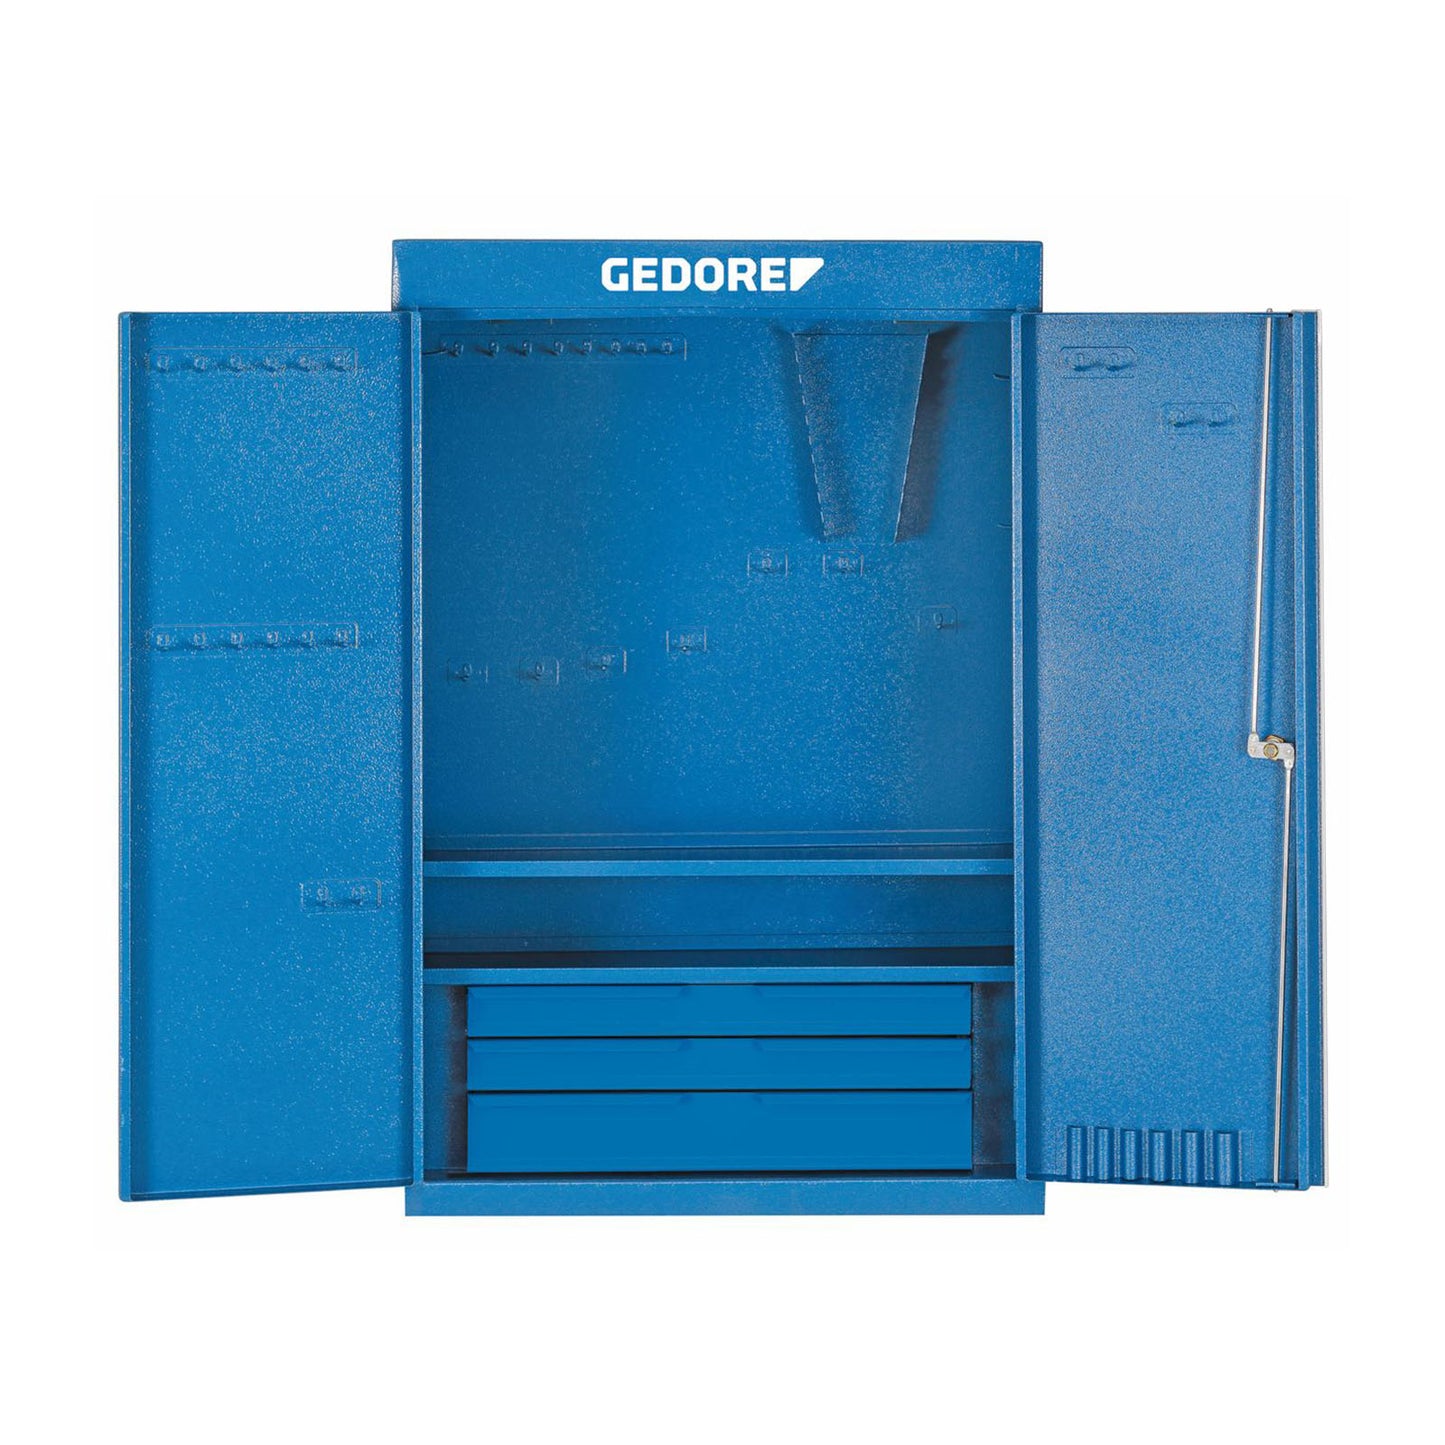 GEDORE 1400 L - Tool cabinet (6612600)